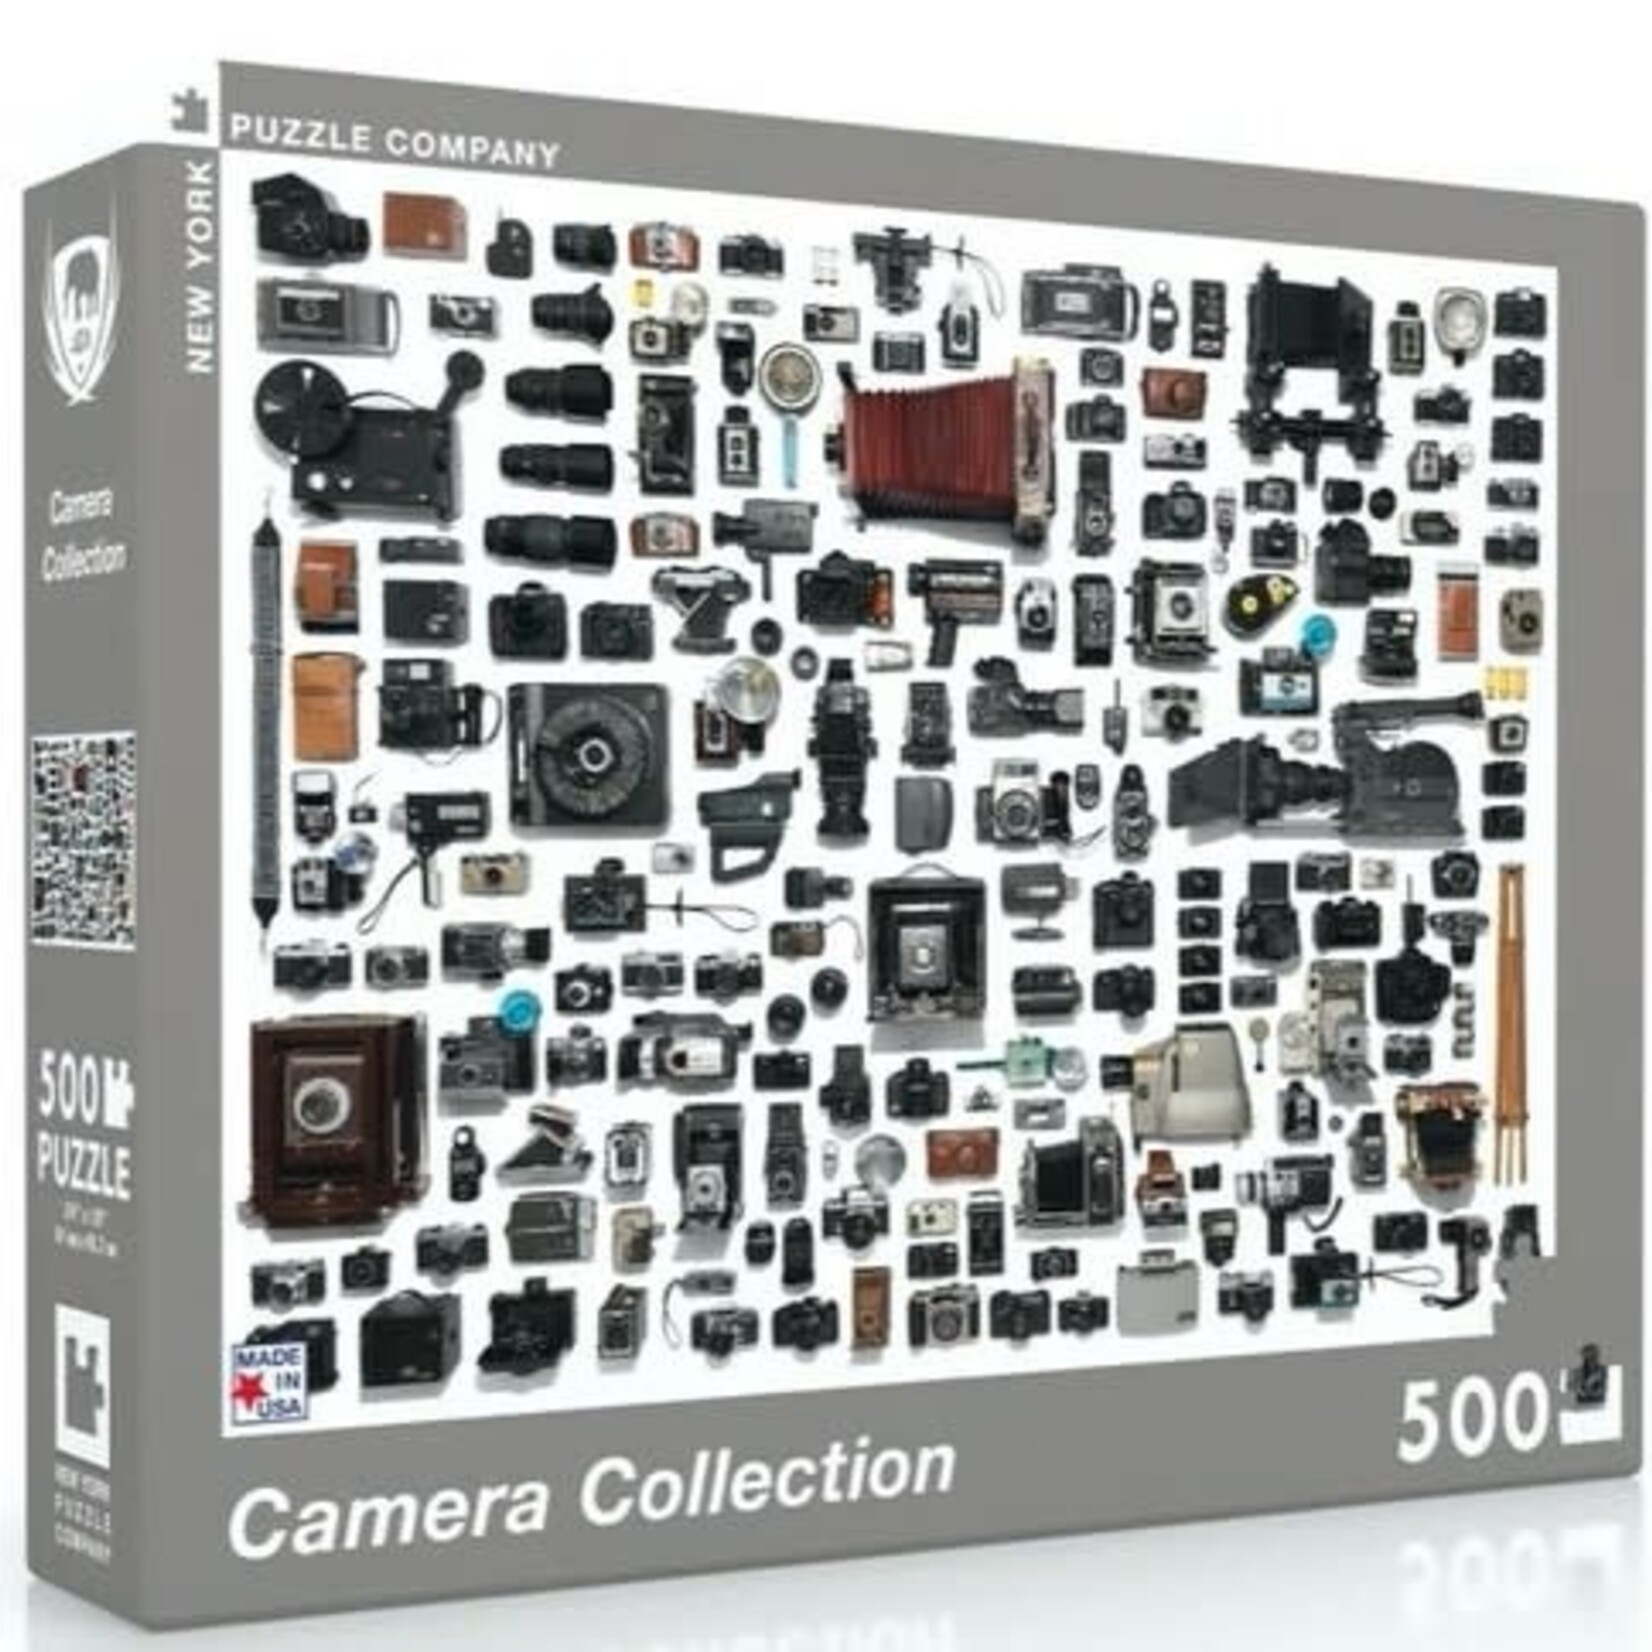 New York Puzzle Company 500 pc Puzzle Jim Golden Camera Collection